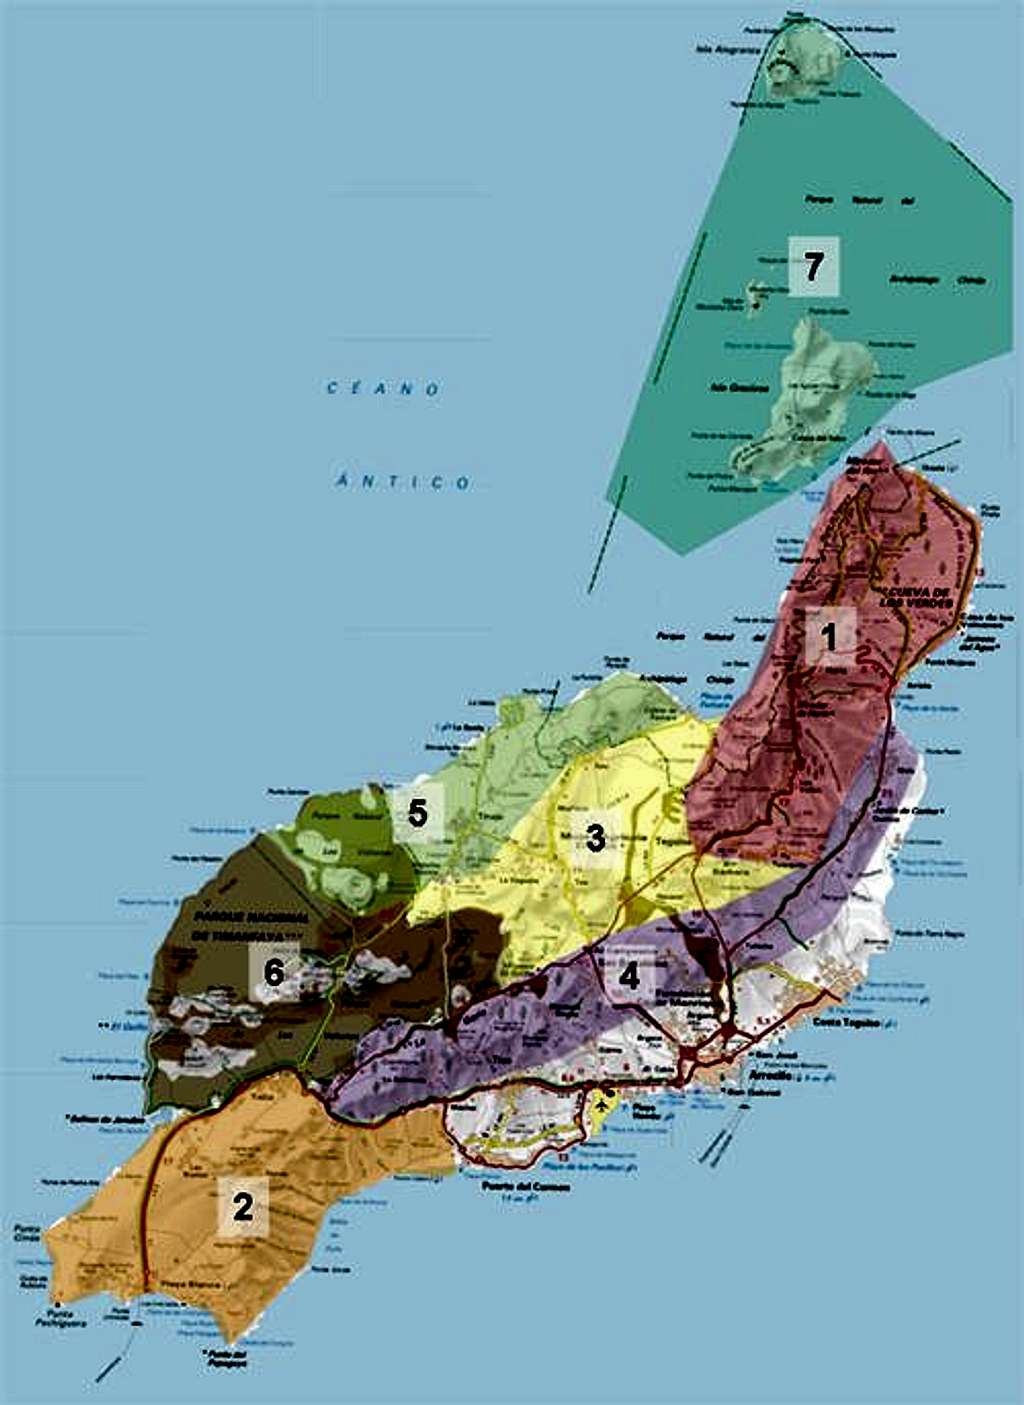 Overview map of Lanzarote